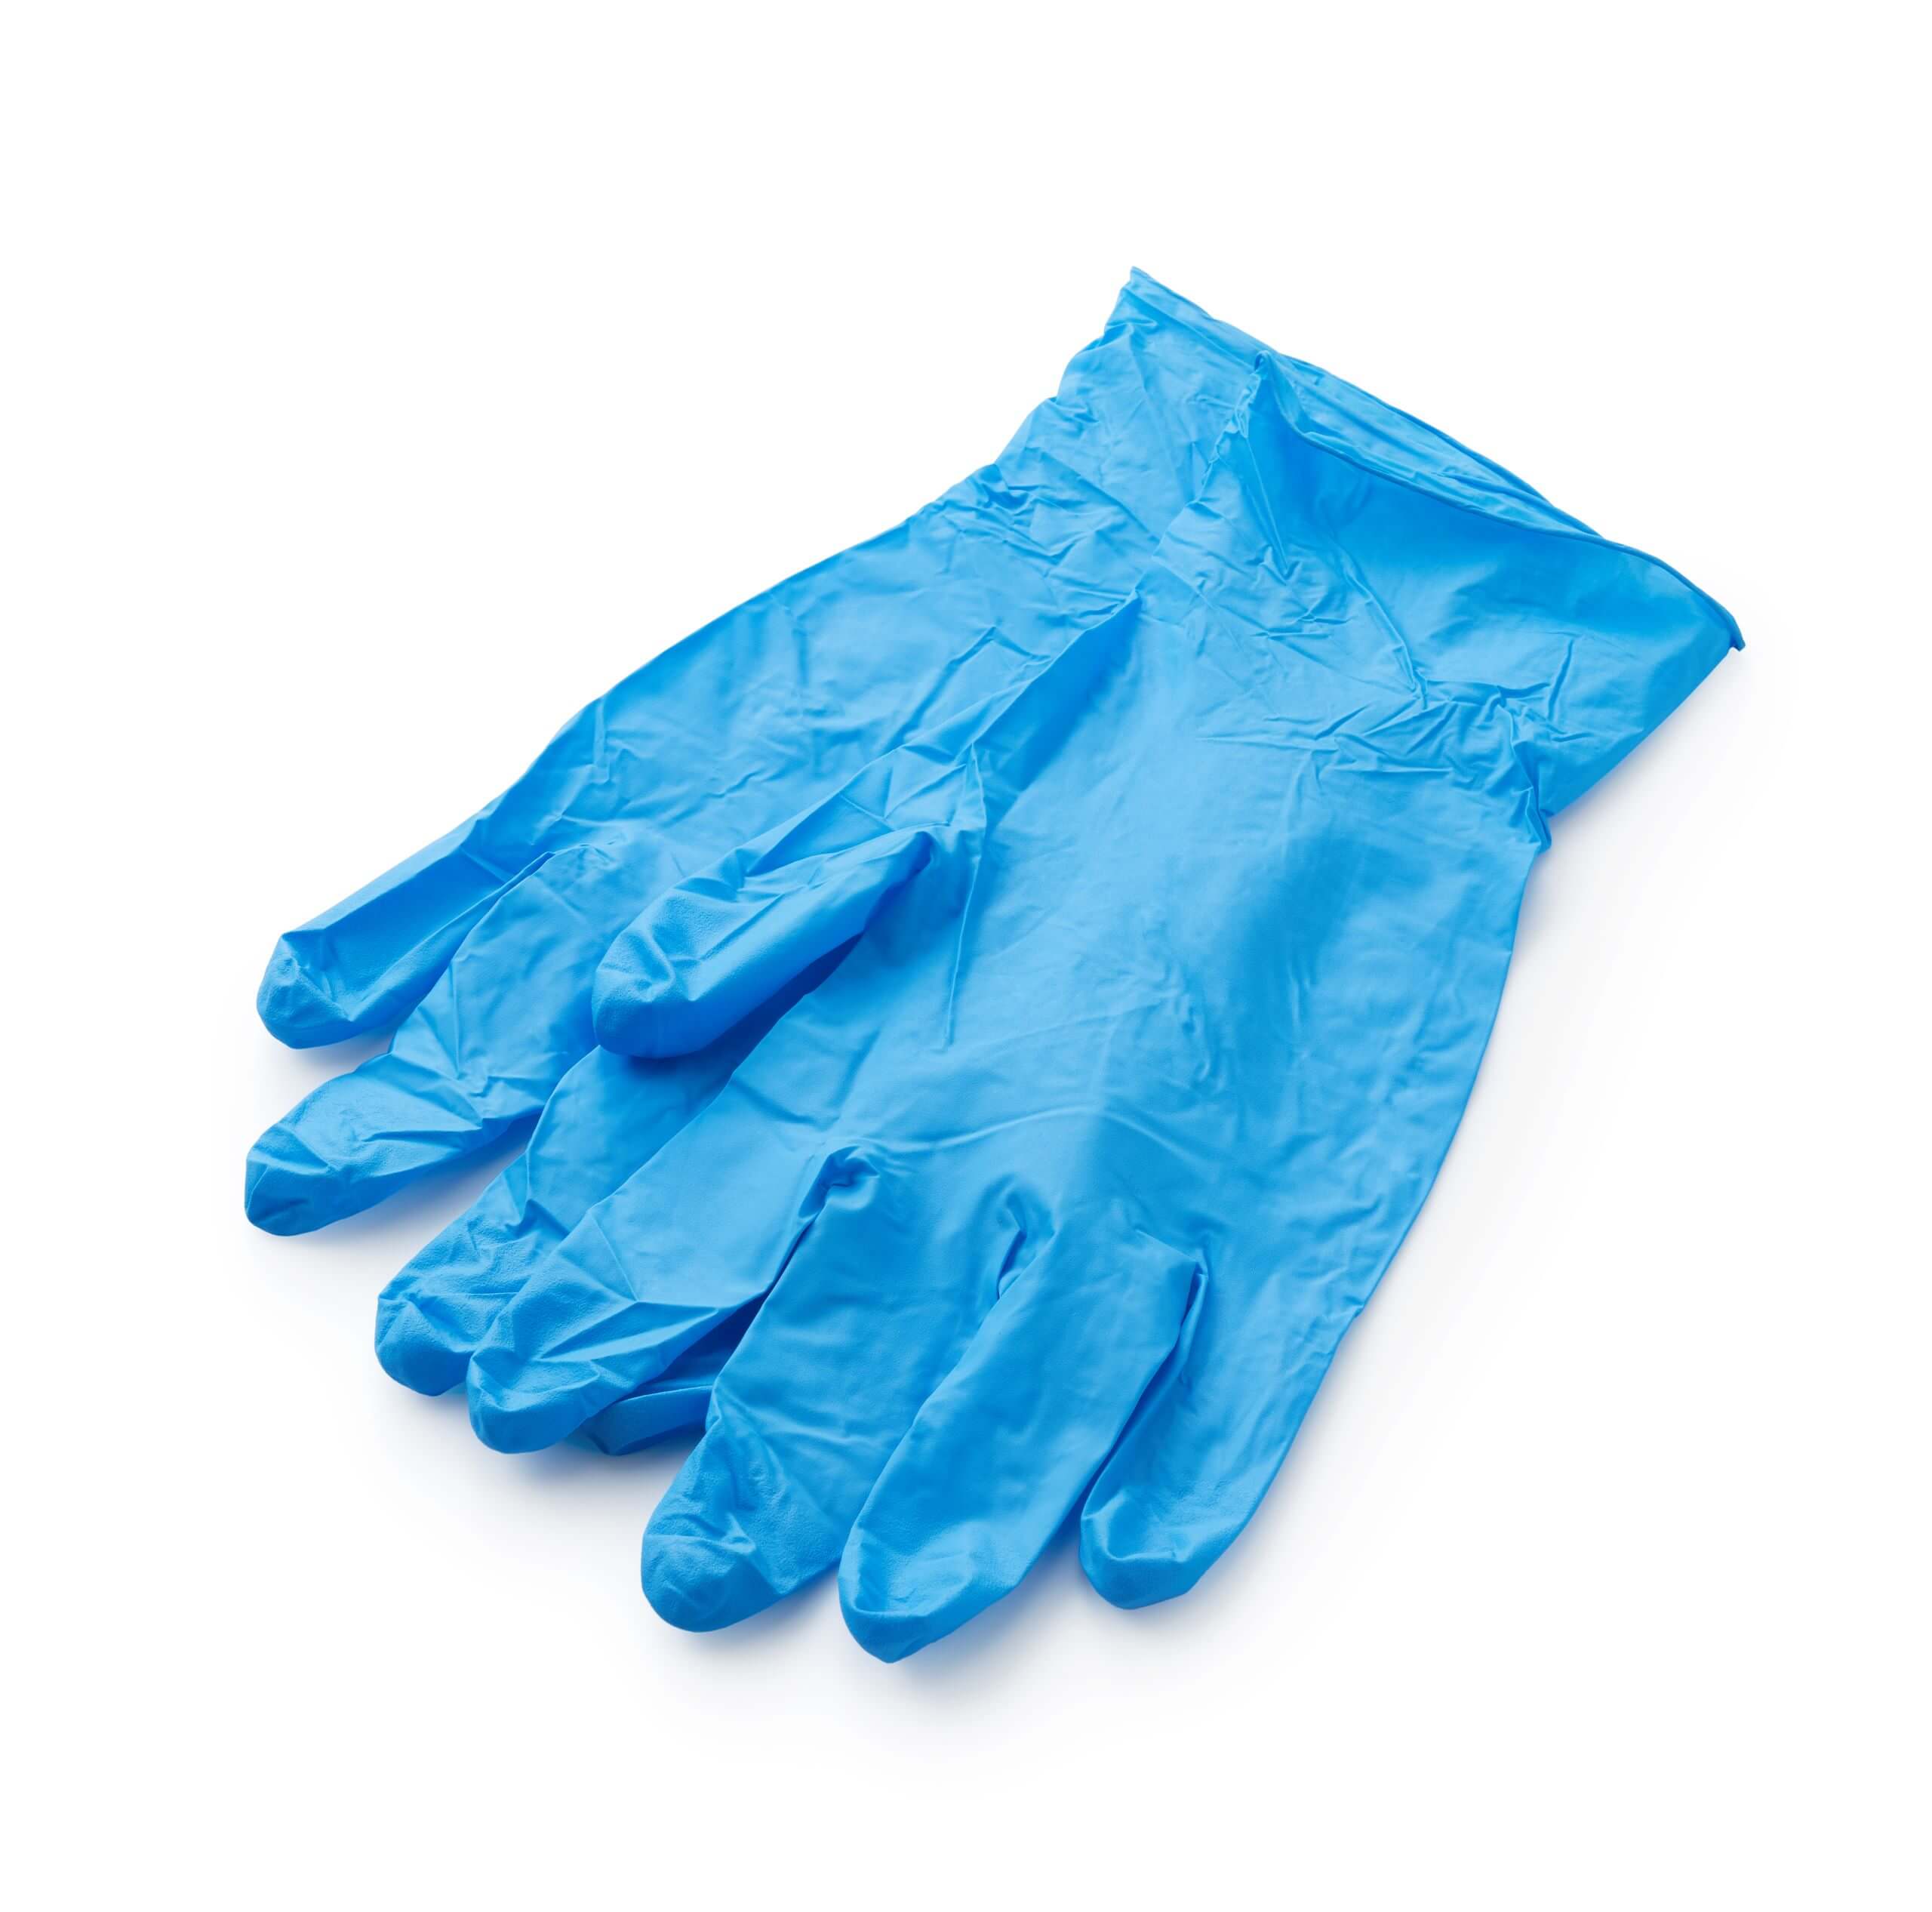 An image of our Disposable Nitrile Hand Gloves.